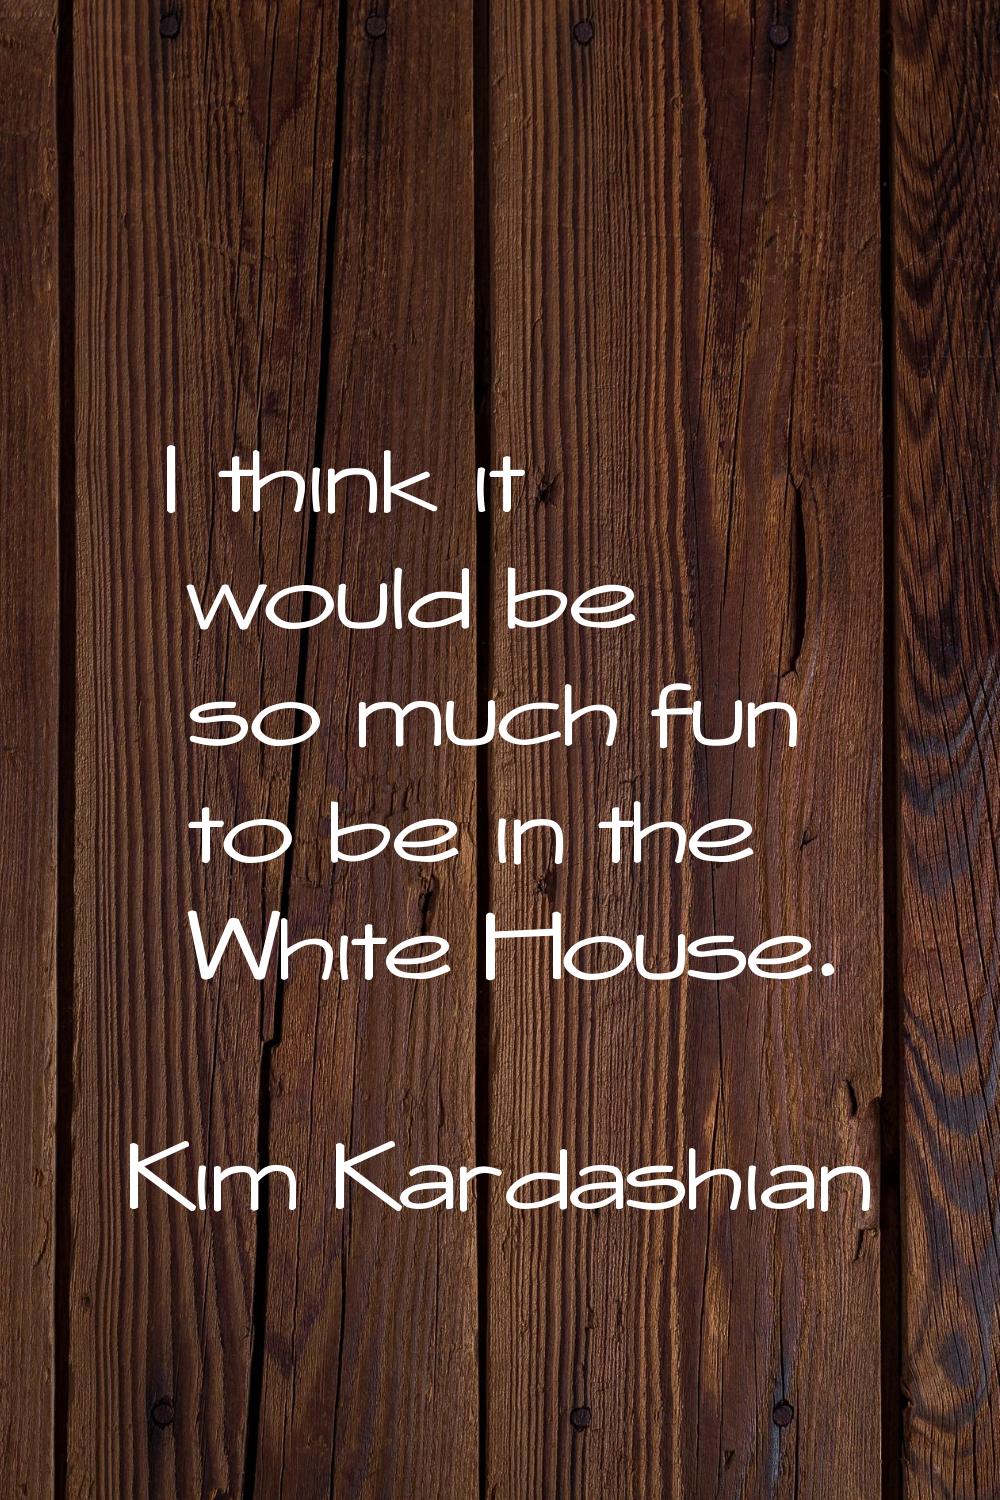 I think it would be so much fun to be in the White House.